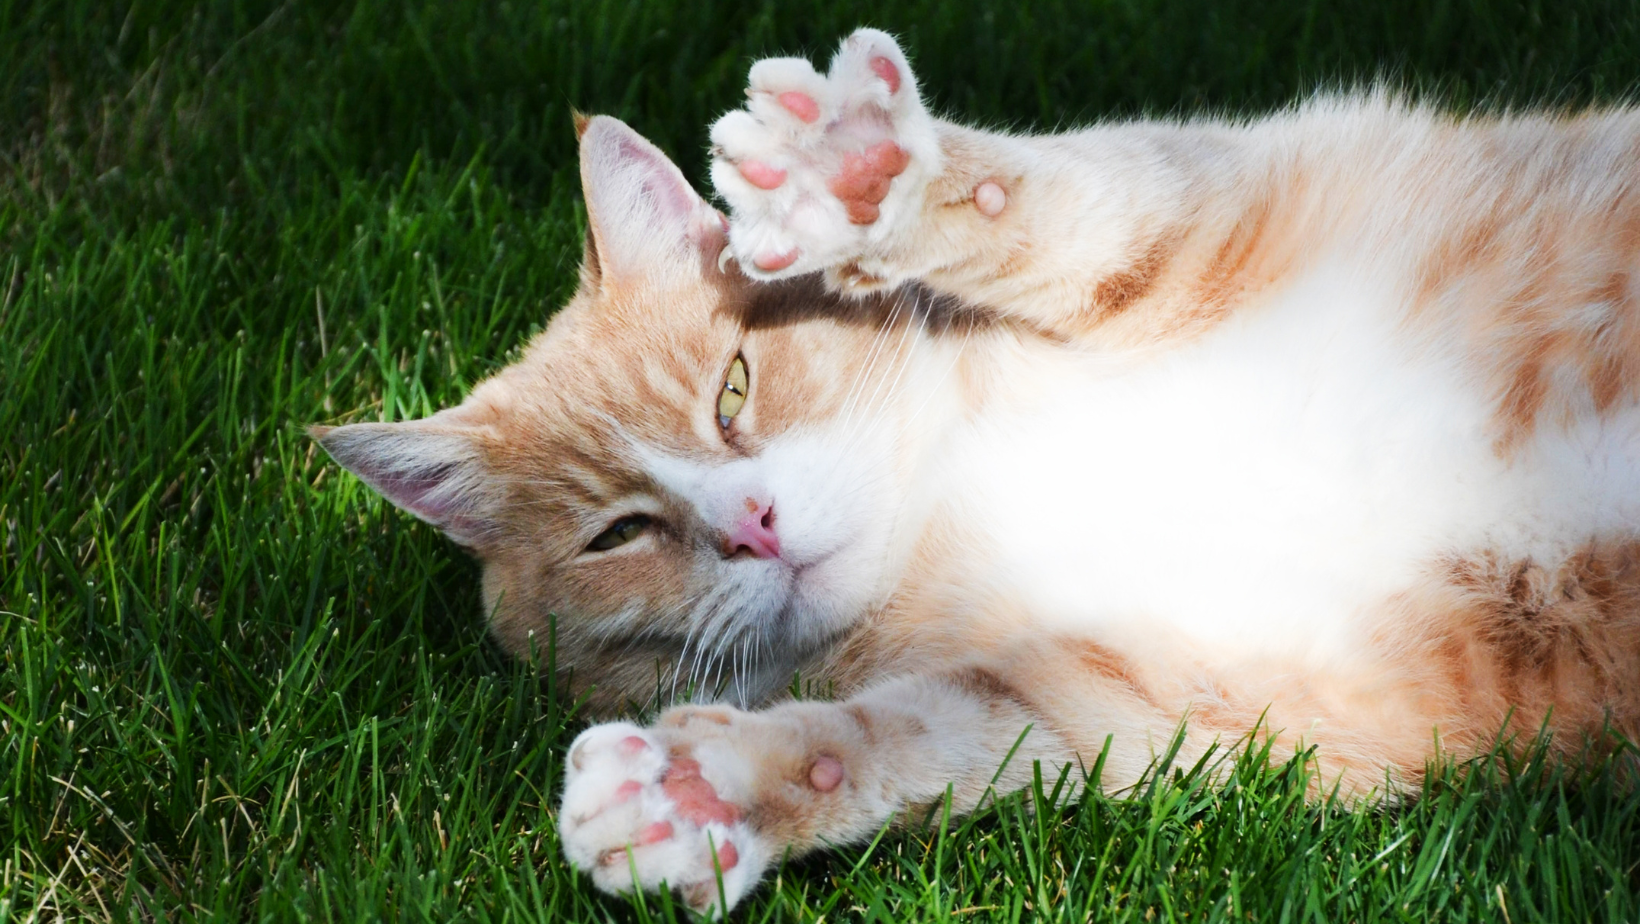 10 Tips for a Happy and Healthy Kitten